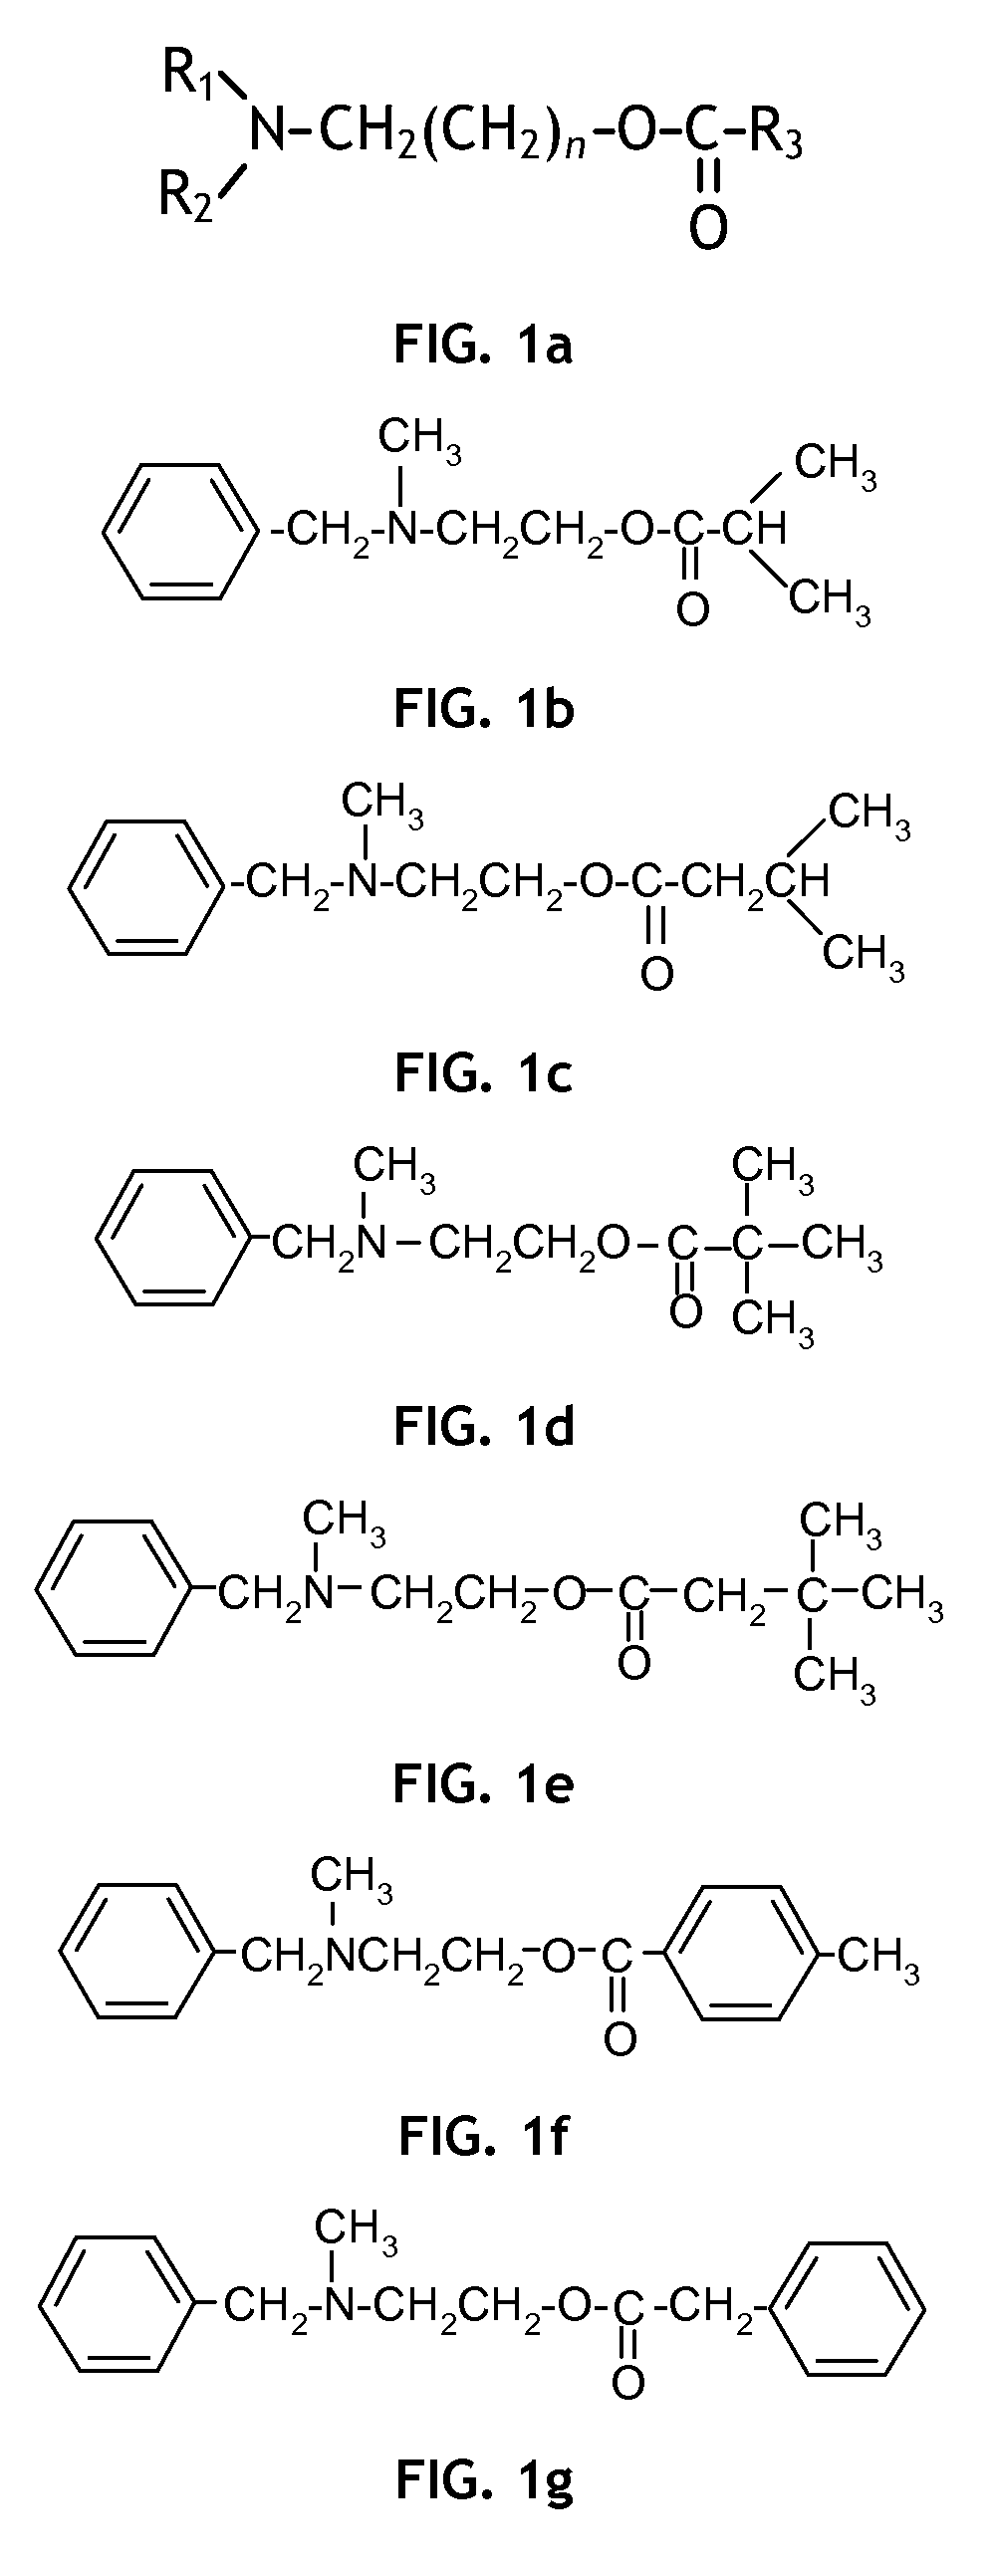 Signaling compositions, methods, and systems for effecting plant growth and crop enhancement